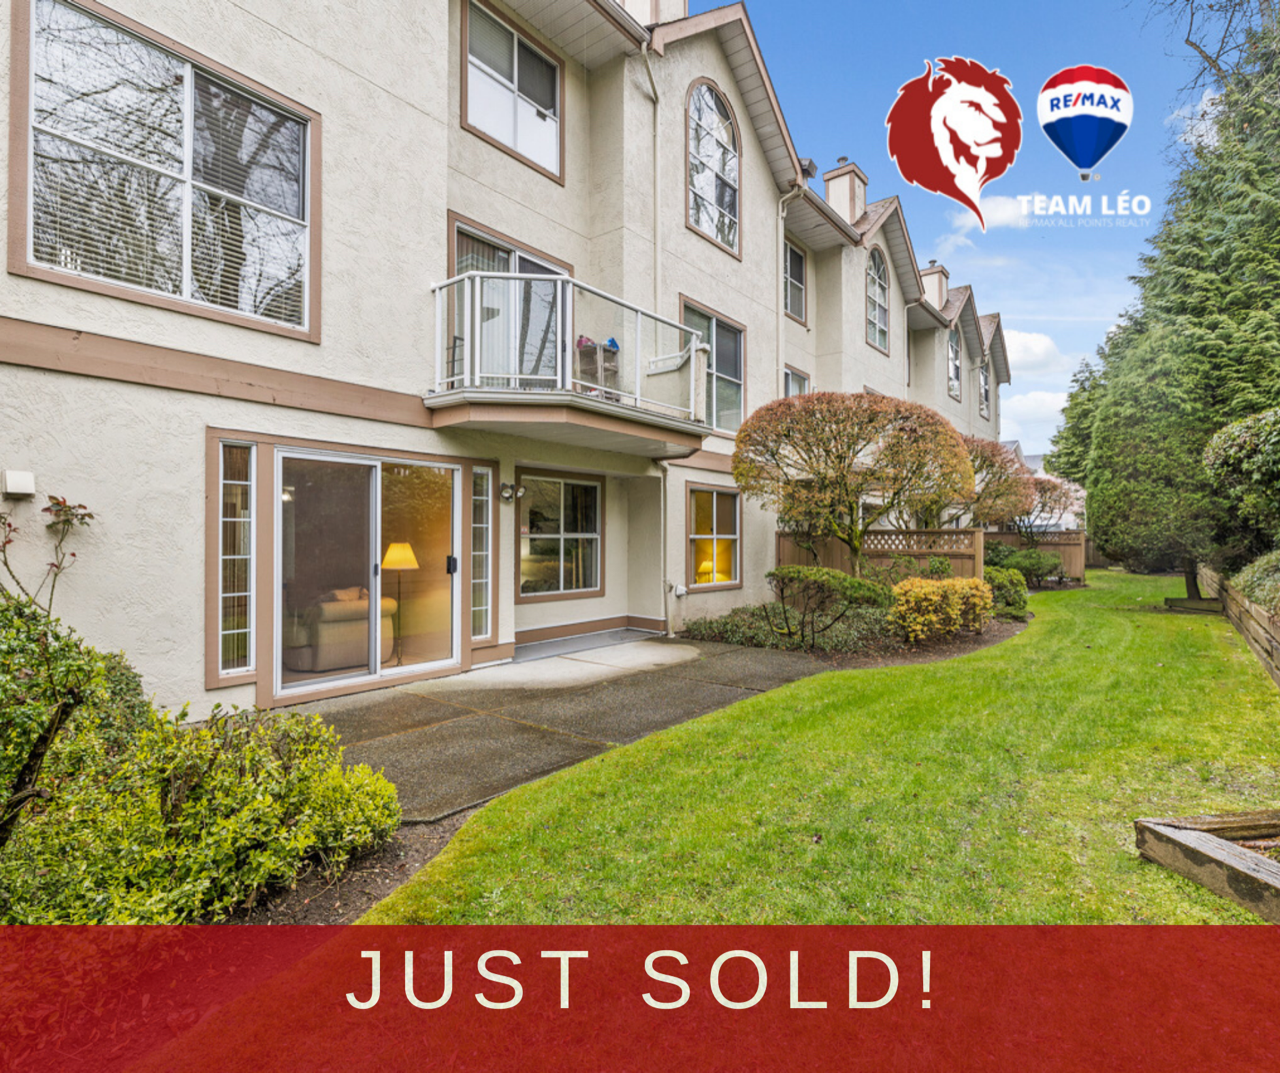 SOLD! 11-5575 Patterson Ave